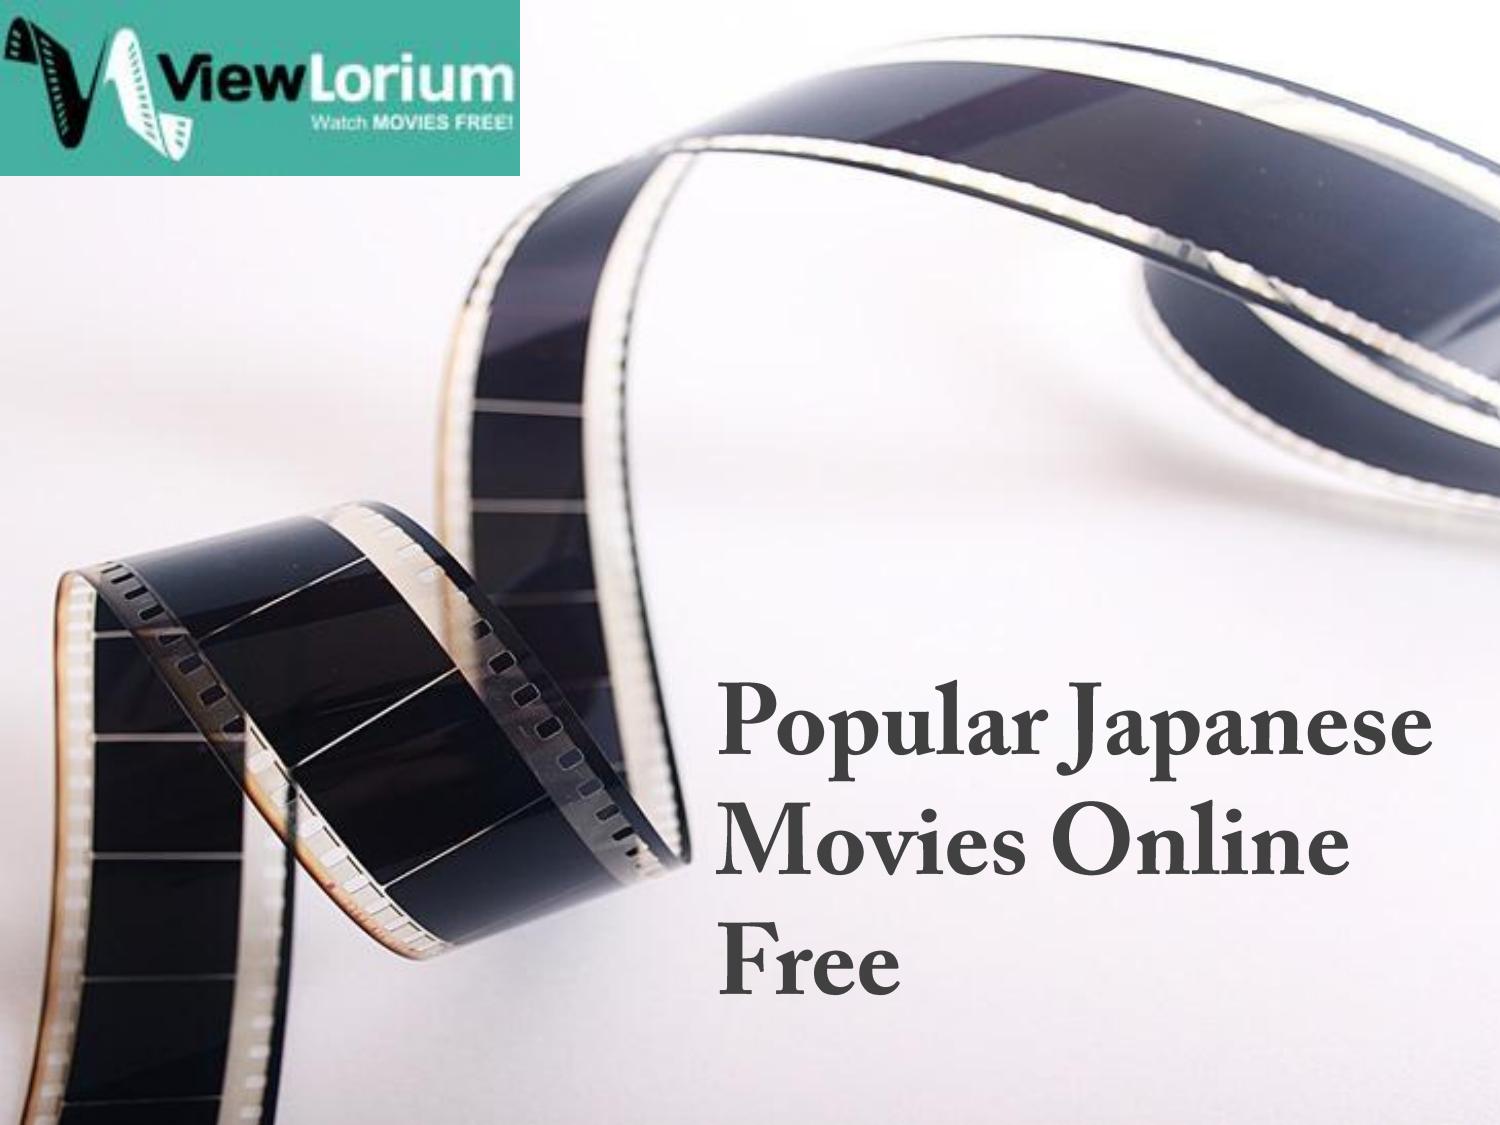 Free Japanese Movies Online own balls